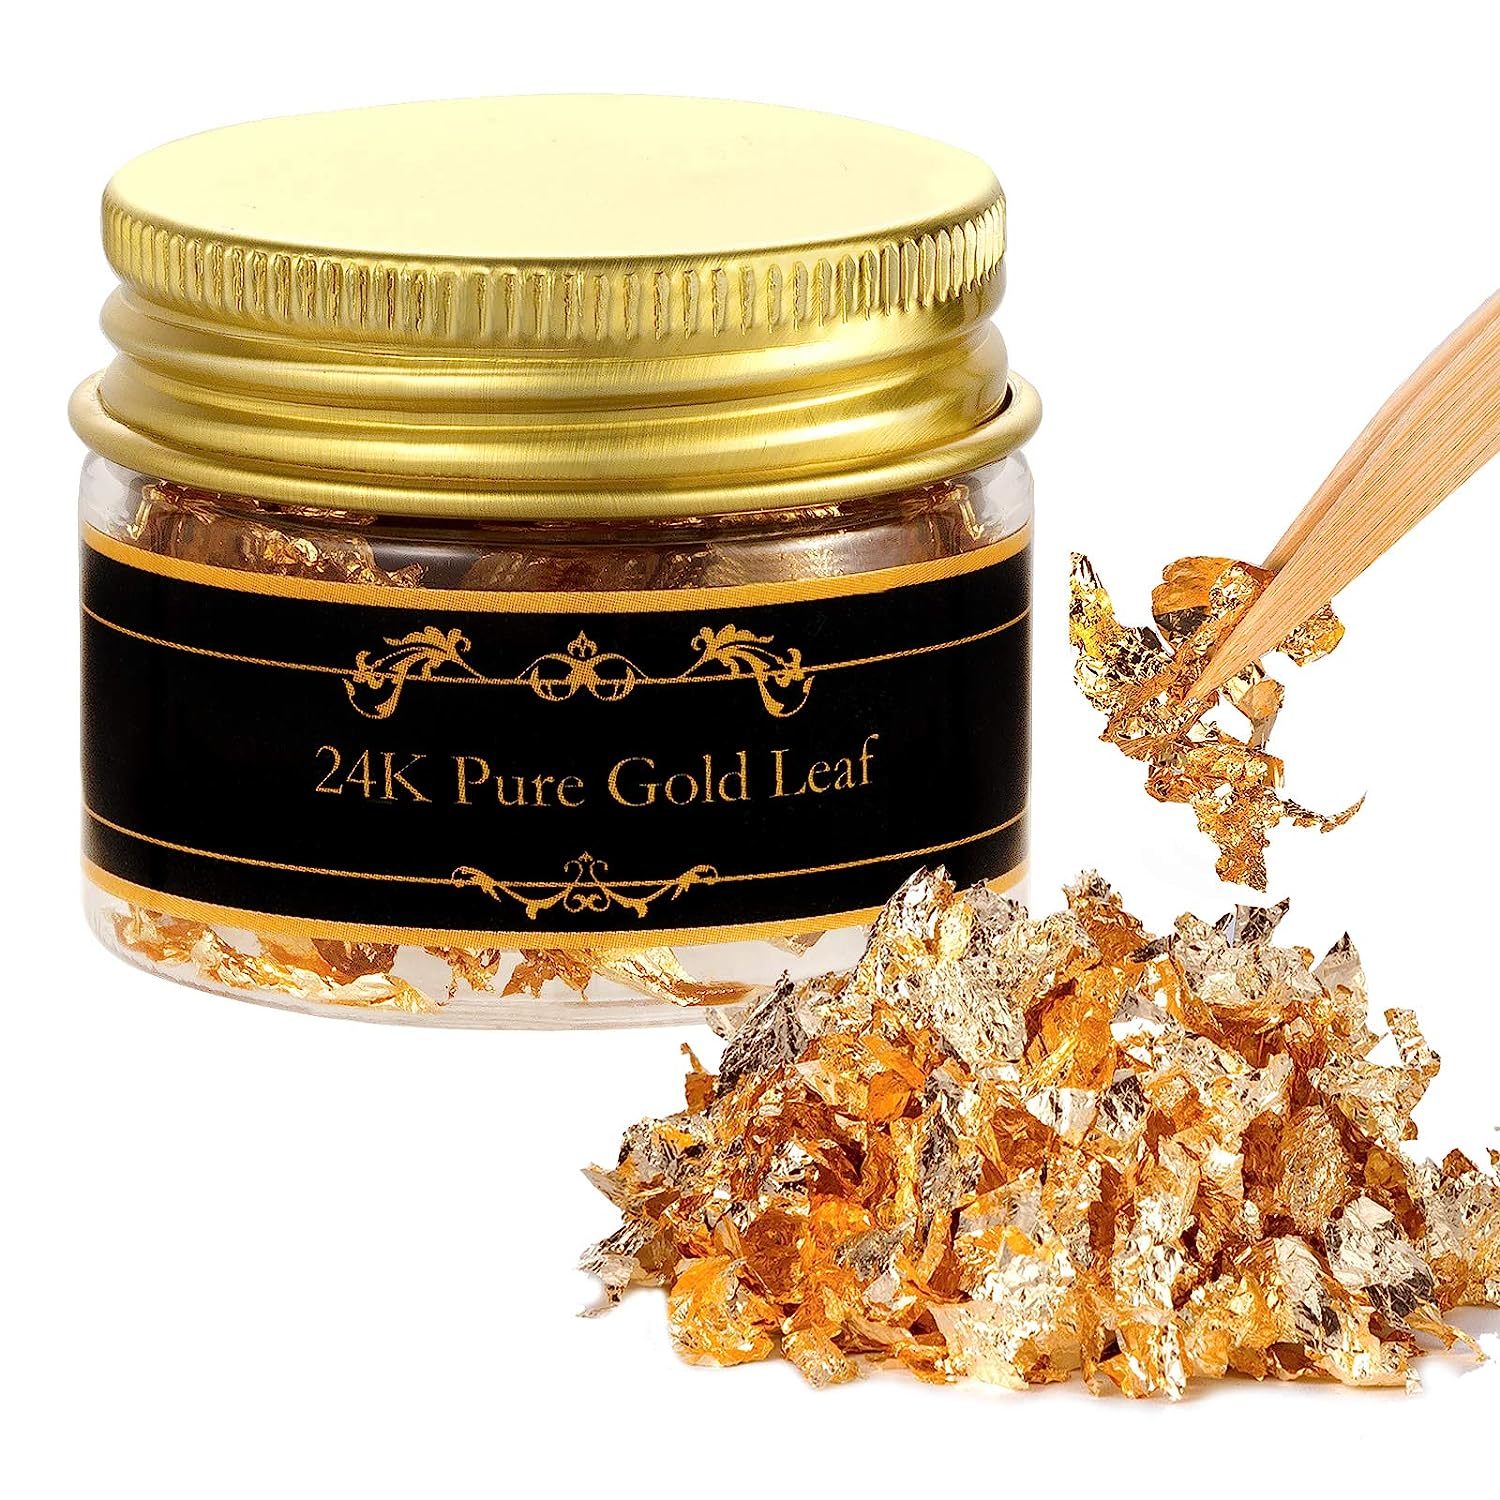 Primary image for Edible Genuine Gold Leaf Flakes With Tweezers - 30Mg 24K Gold Leaf Decorative Di